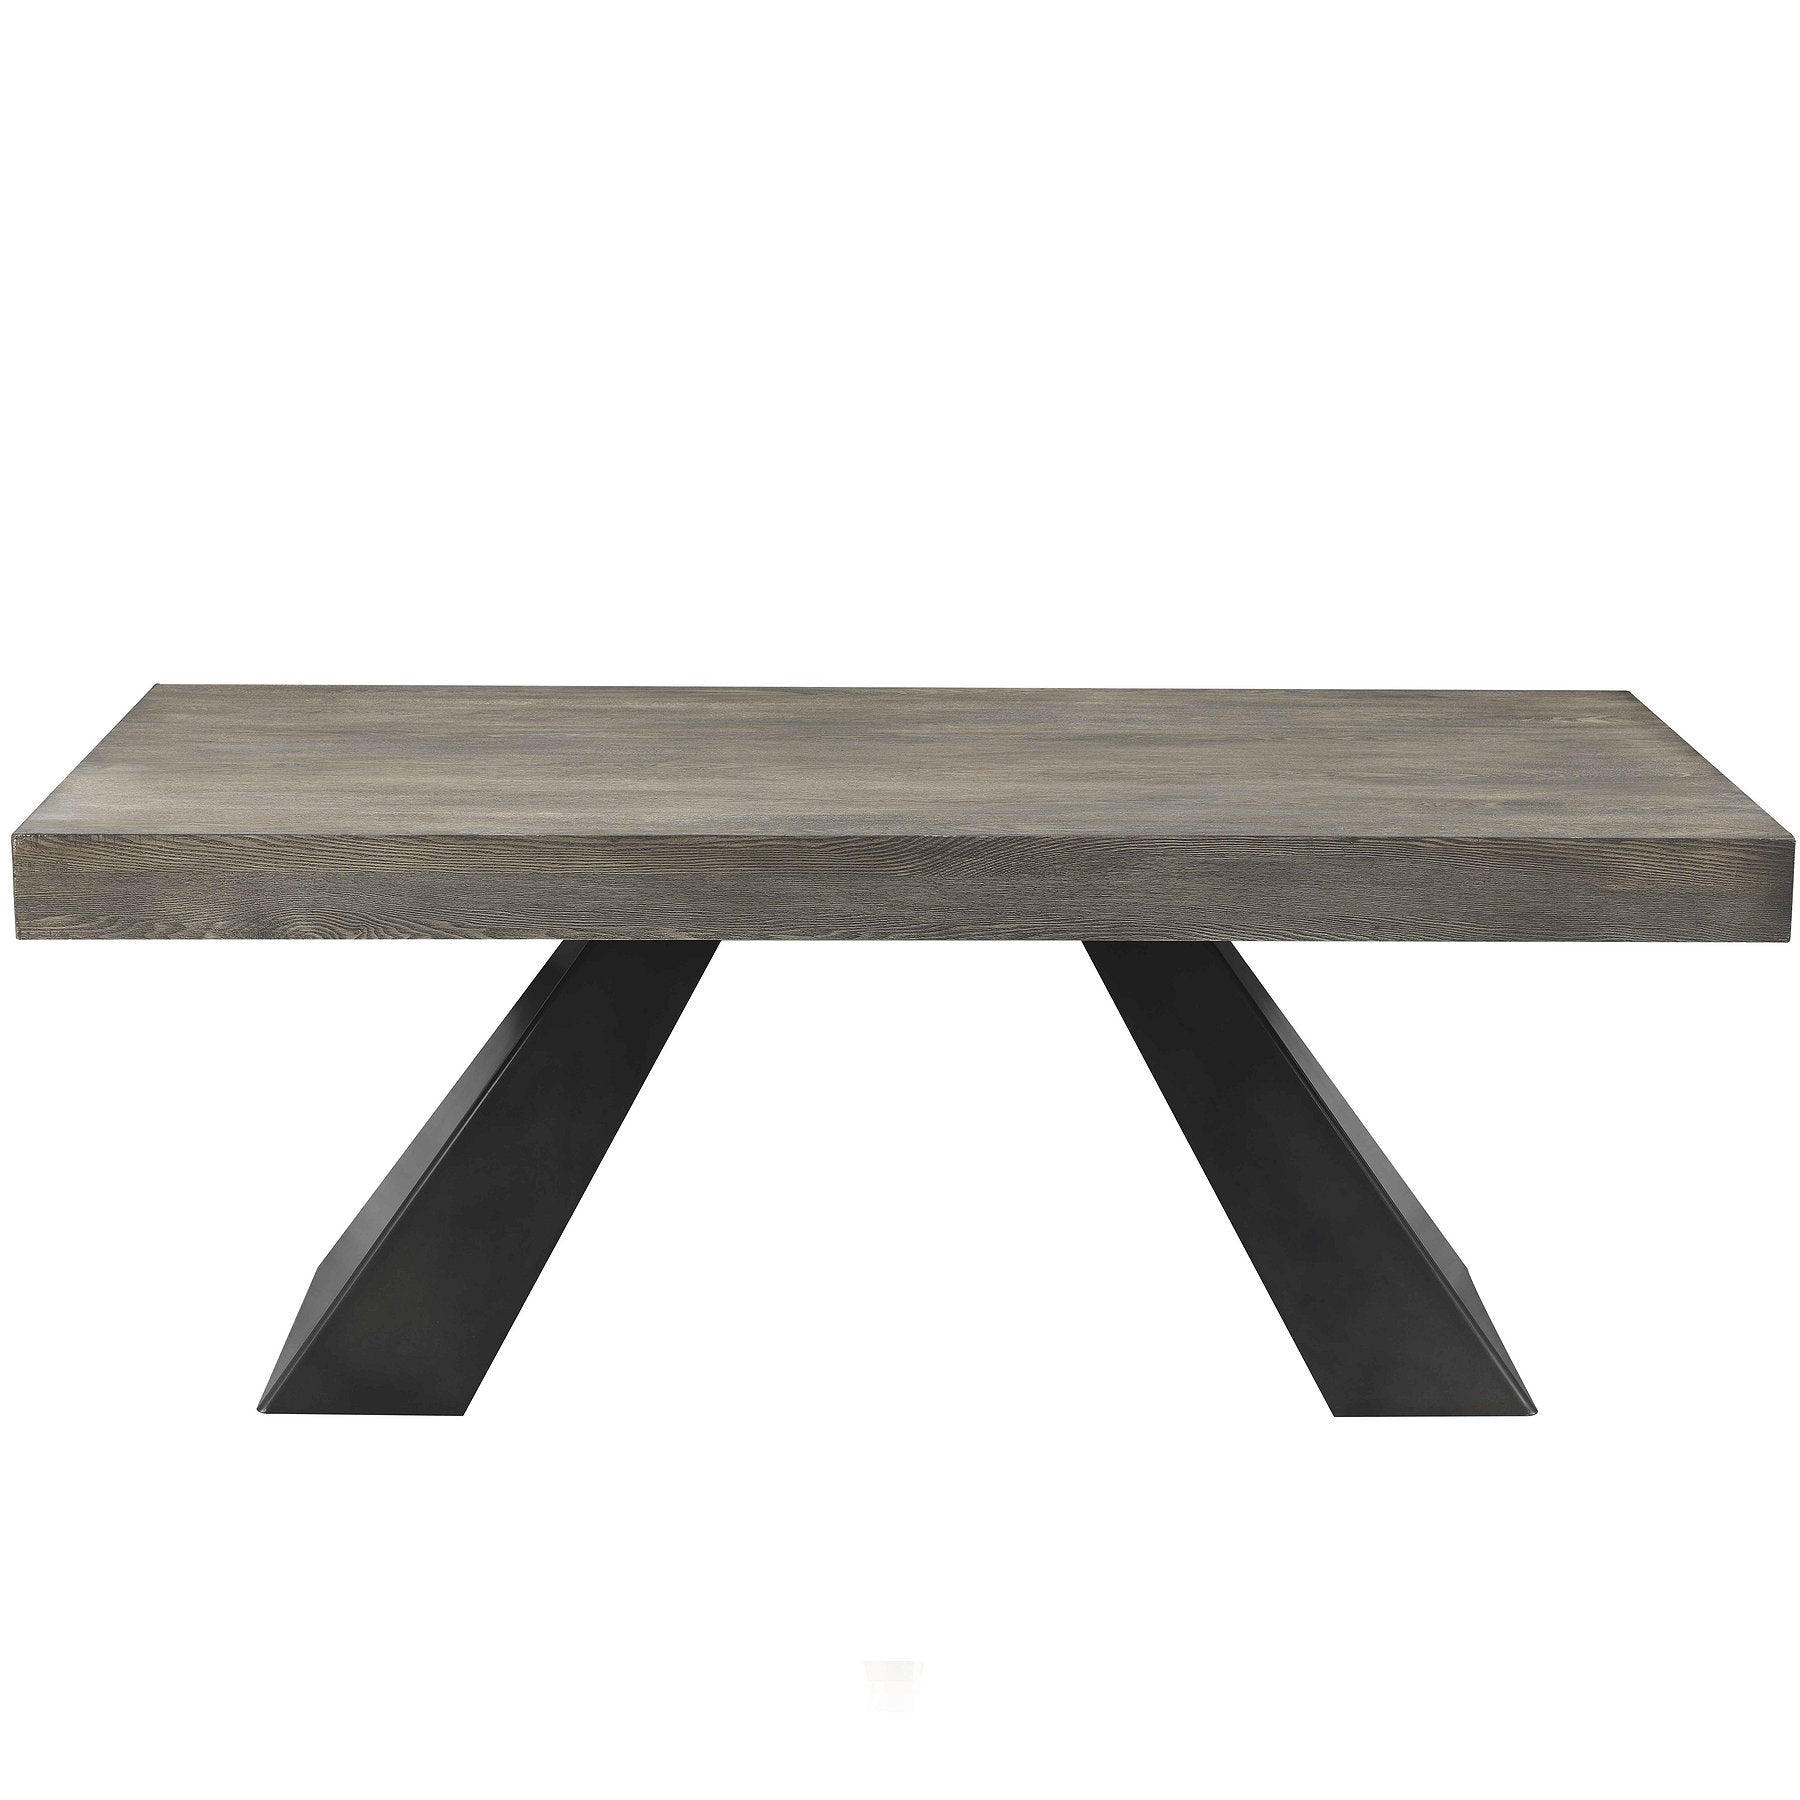 40216 brody - dining table - Dreamart Gallery